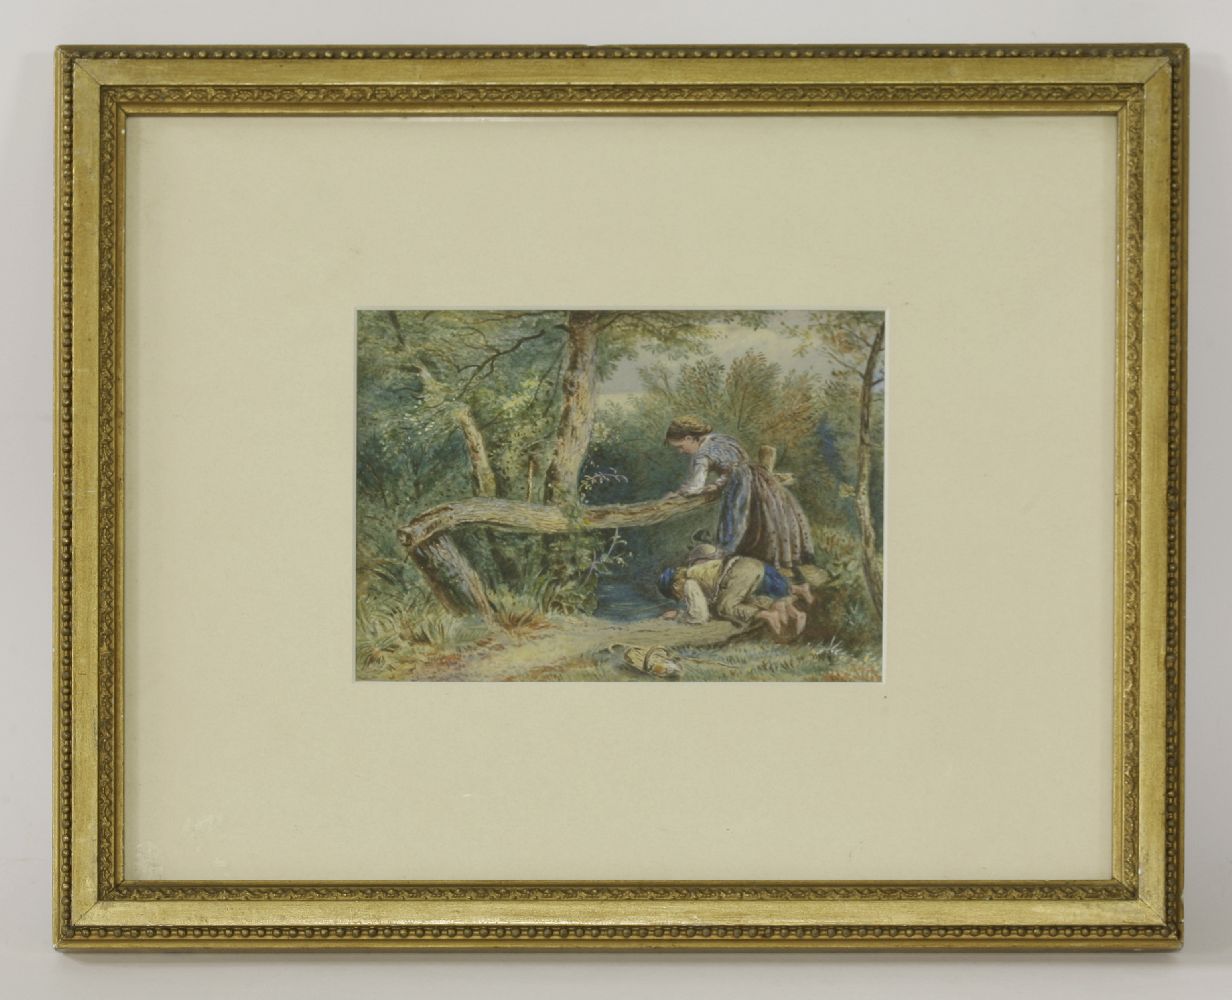 After Myles Birket FosterCHILDREN FISHING FROM A LOG BENCH;A GIRL FISHING WITH DUCKSTwo, - Image 6 of 8